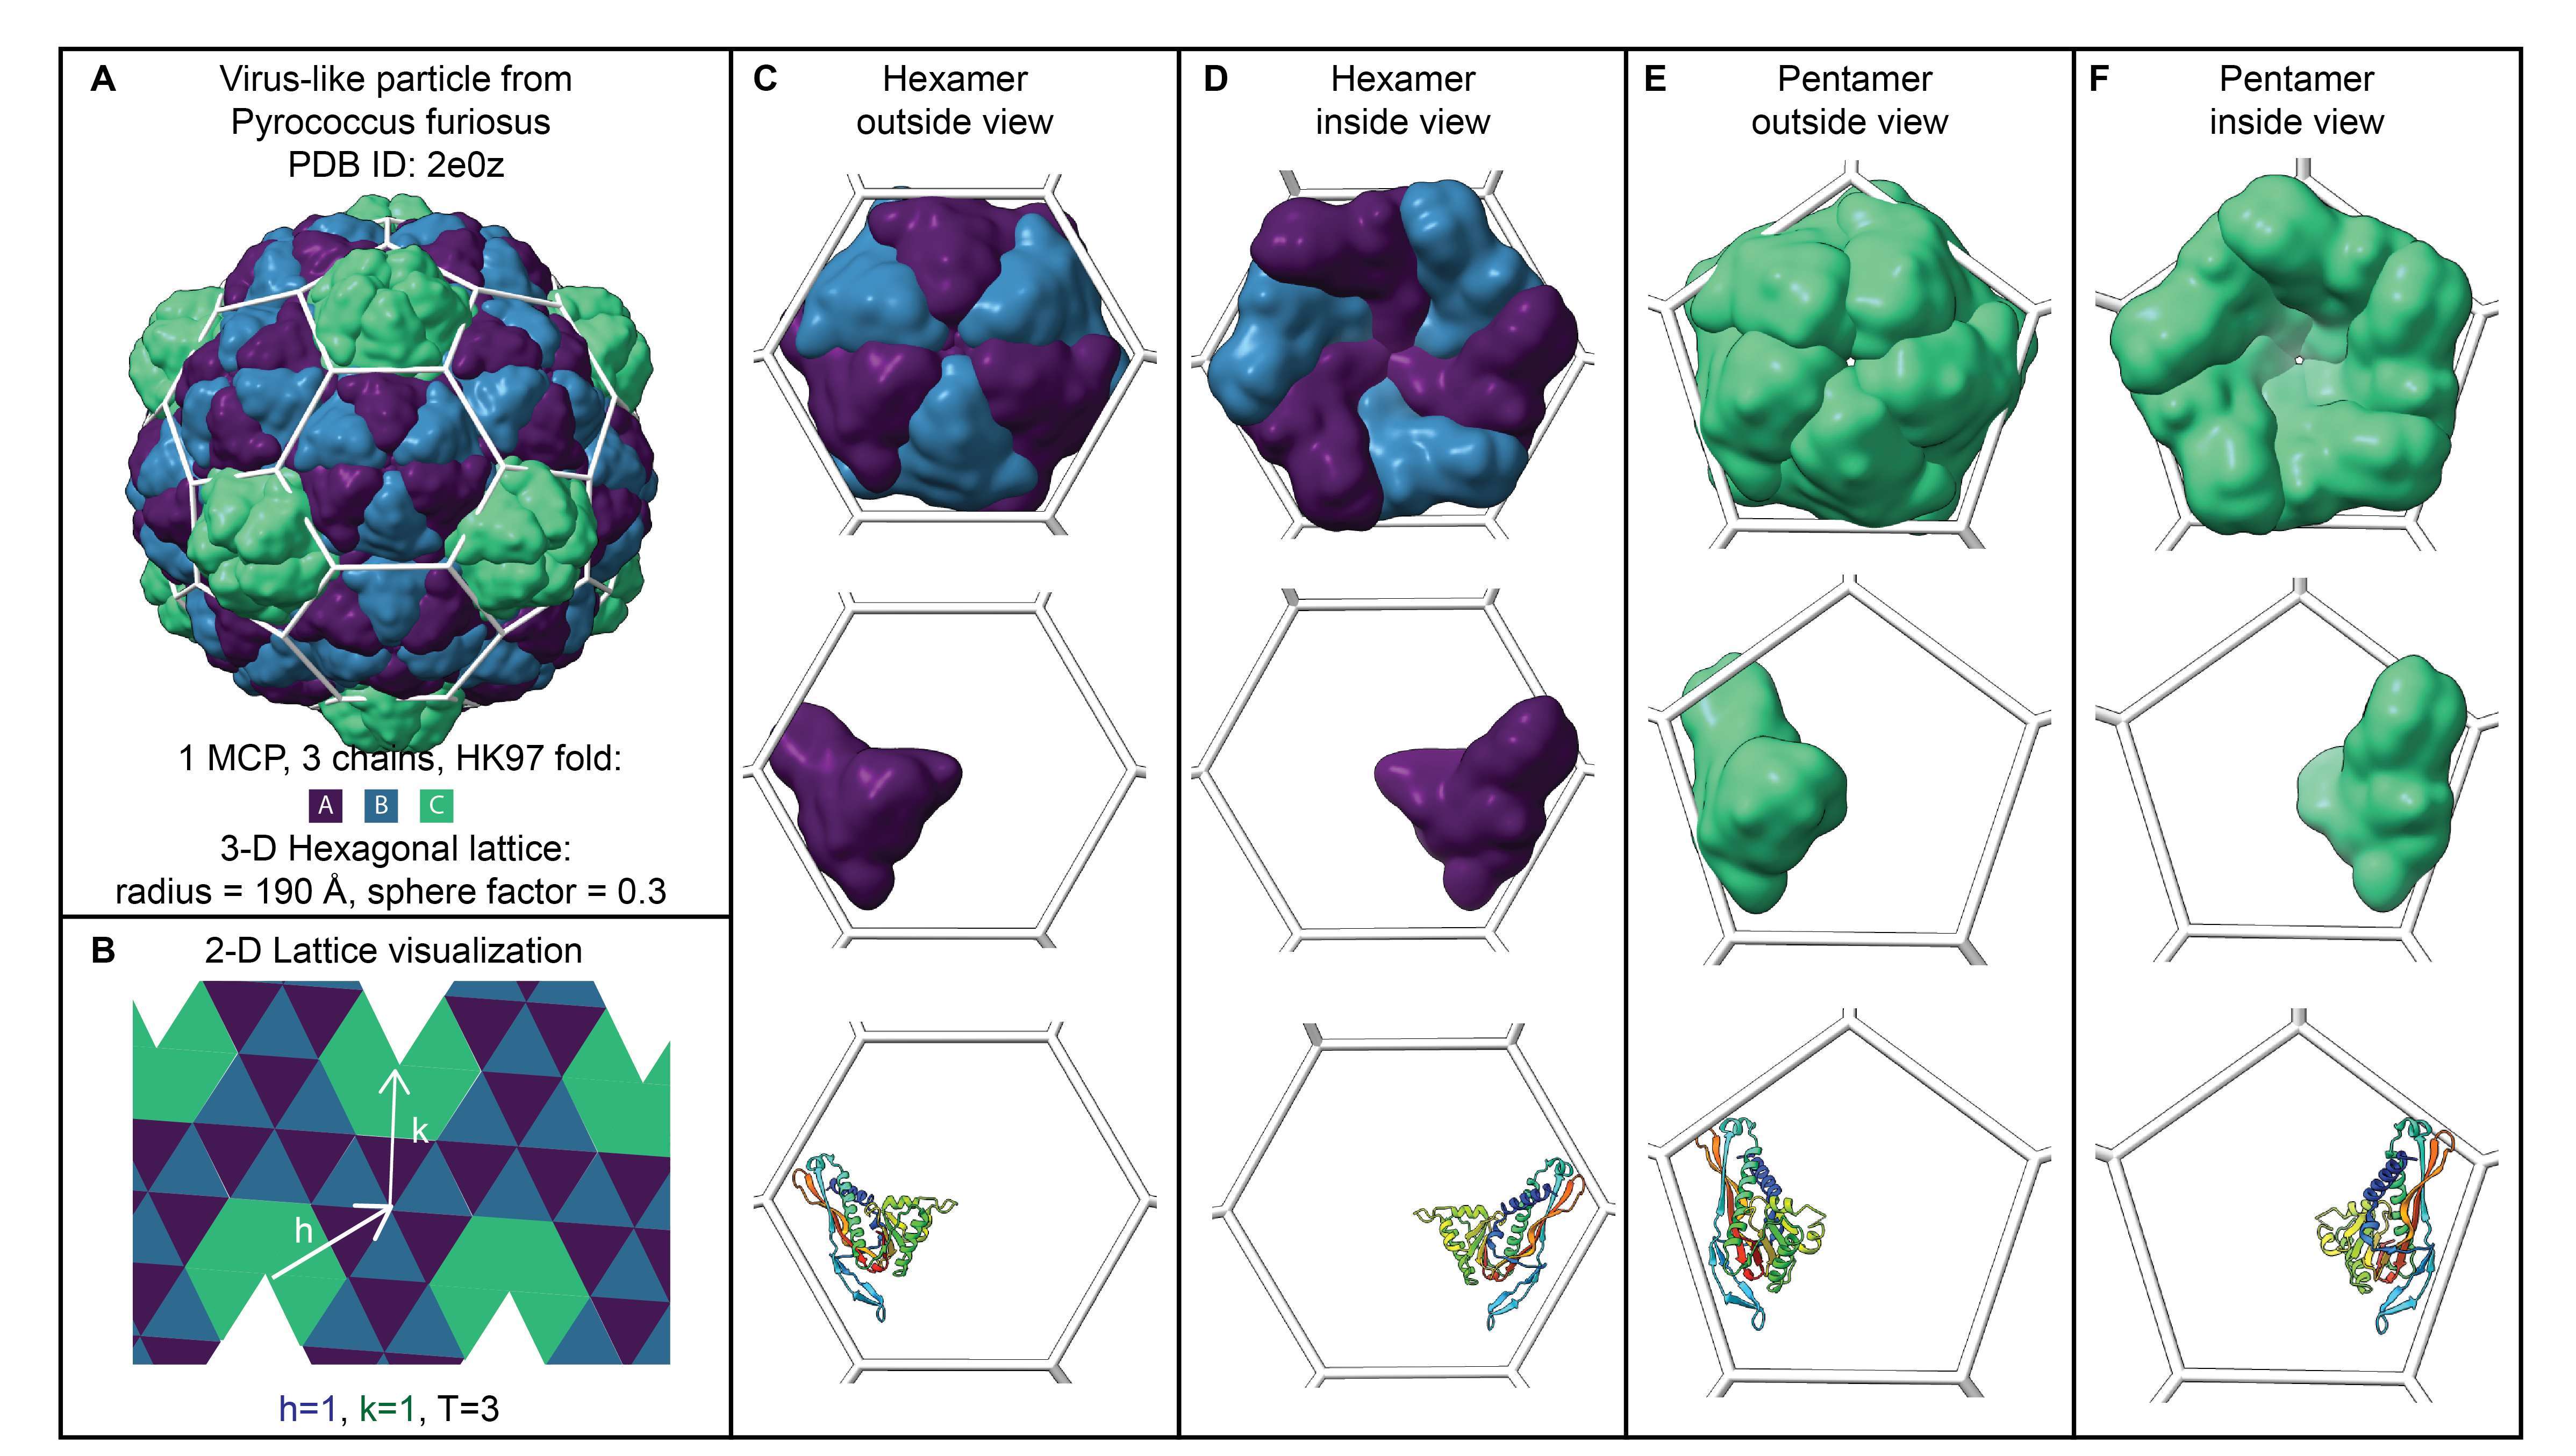 Crystal structure of virus-like particle from Pyrococcus furiosus